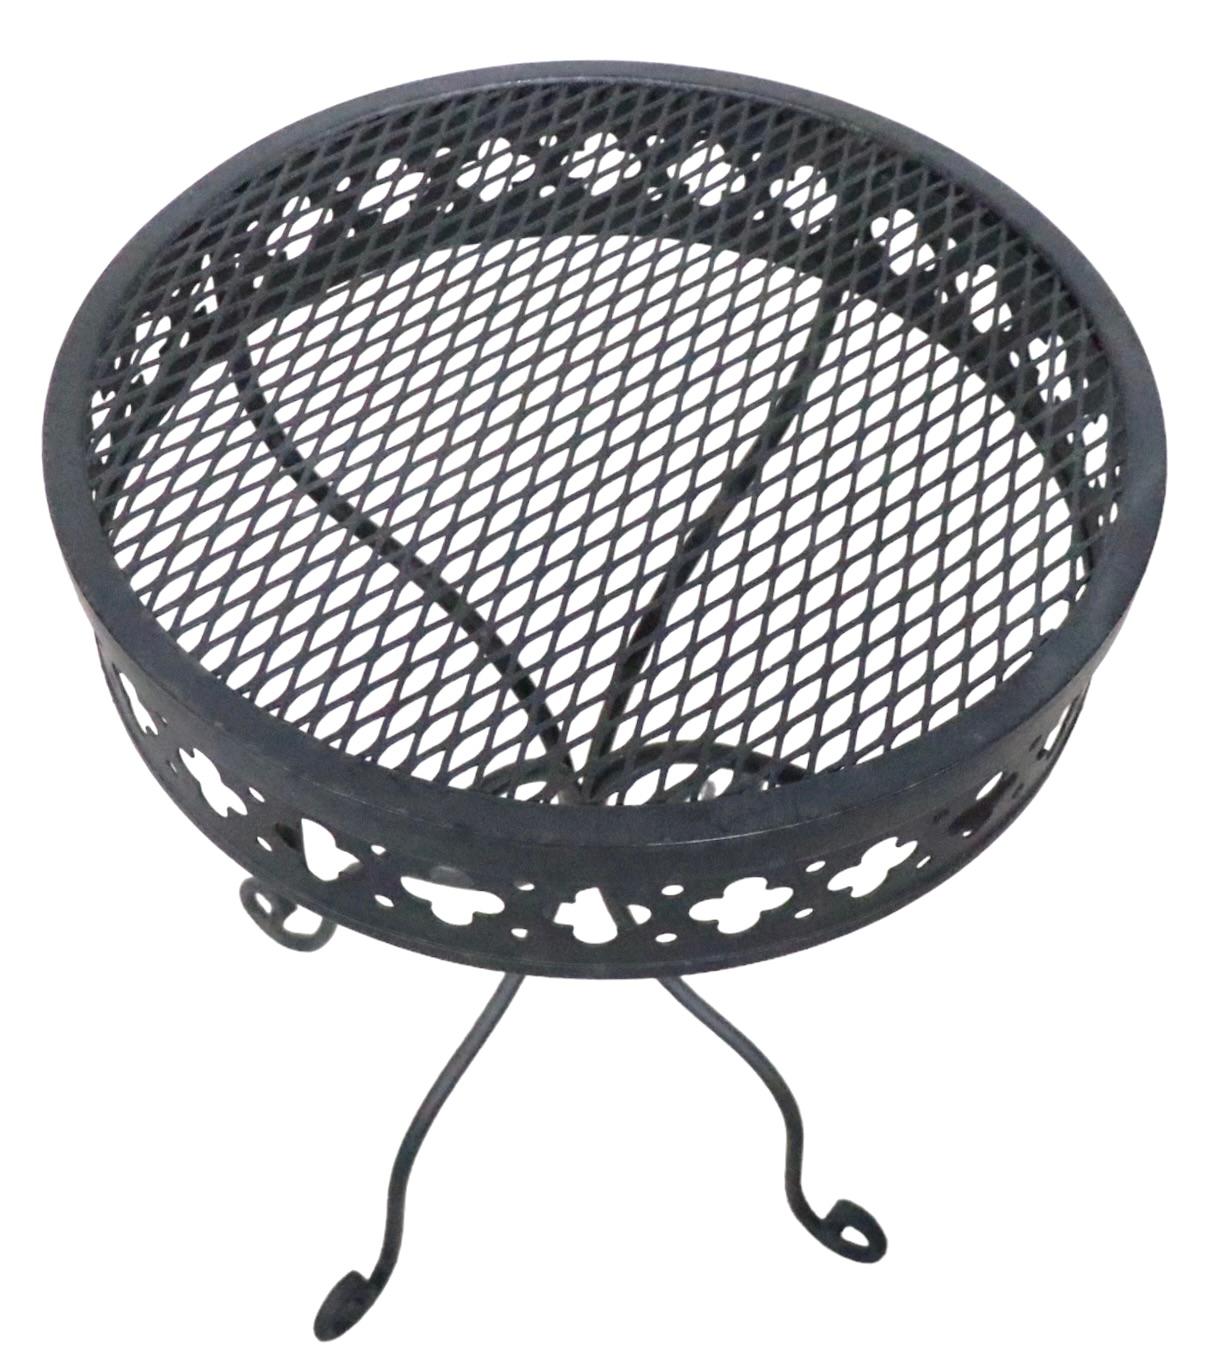 Wrought Iron and Metal Mesh Garden Patio Side End Table Taj Mahal by Salterini In Good Condition For Sale In New York, NY